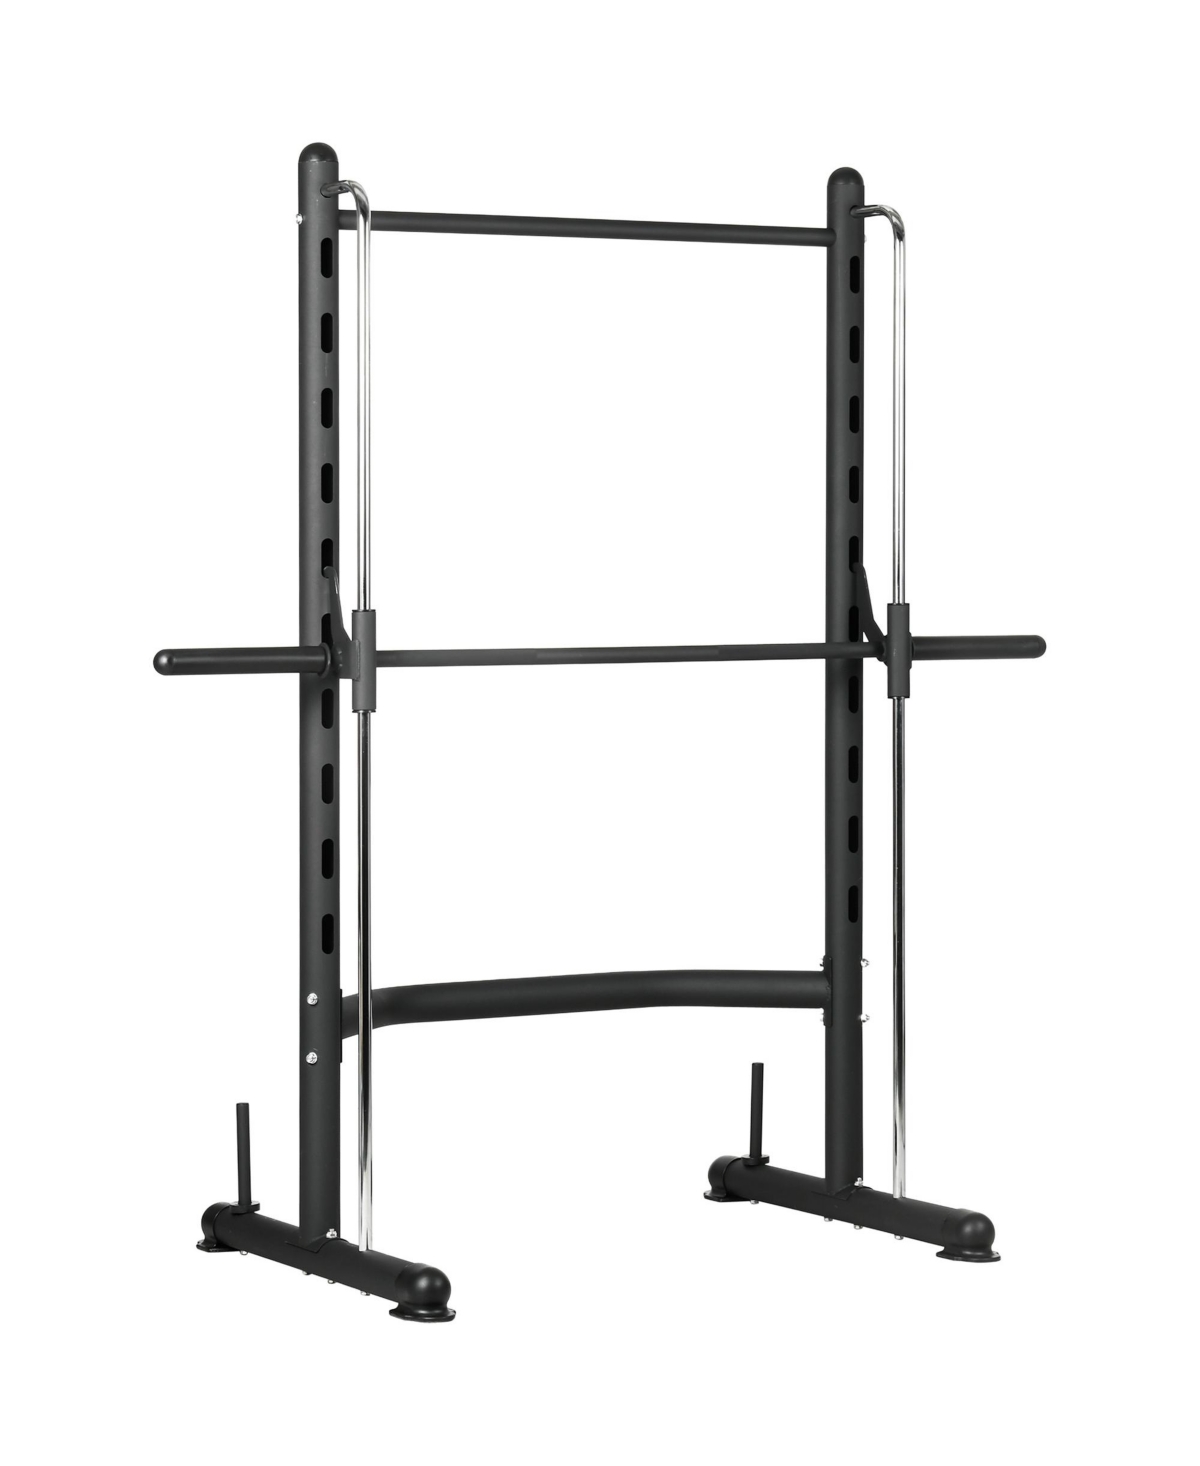 Adjustable Squat Rack with Pull Up Bar and Barbell Bar Bench Press - Black and silver